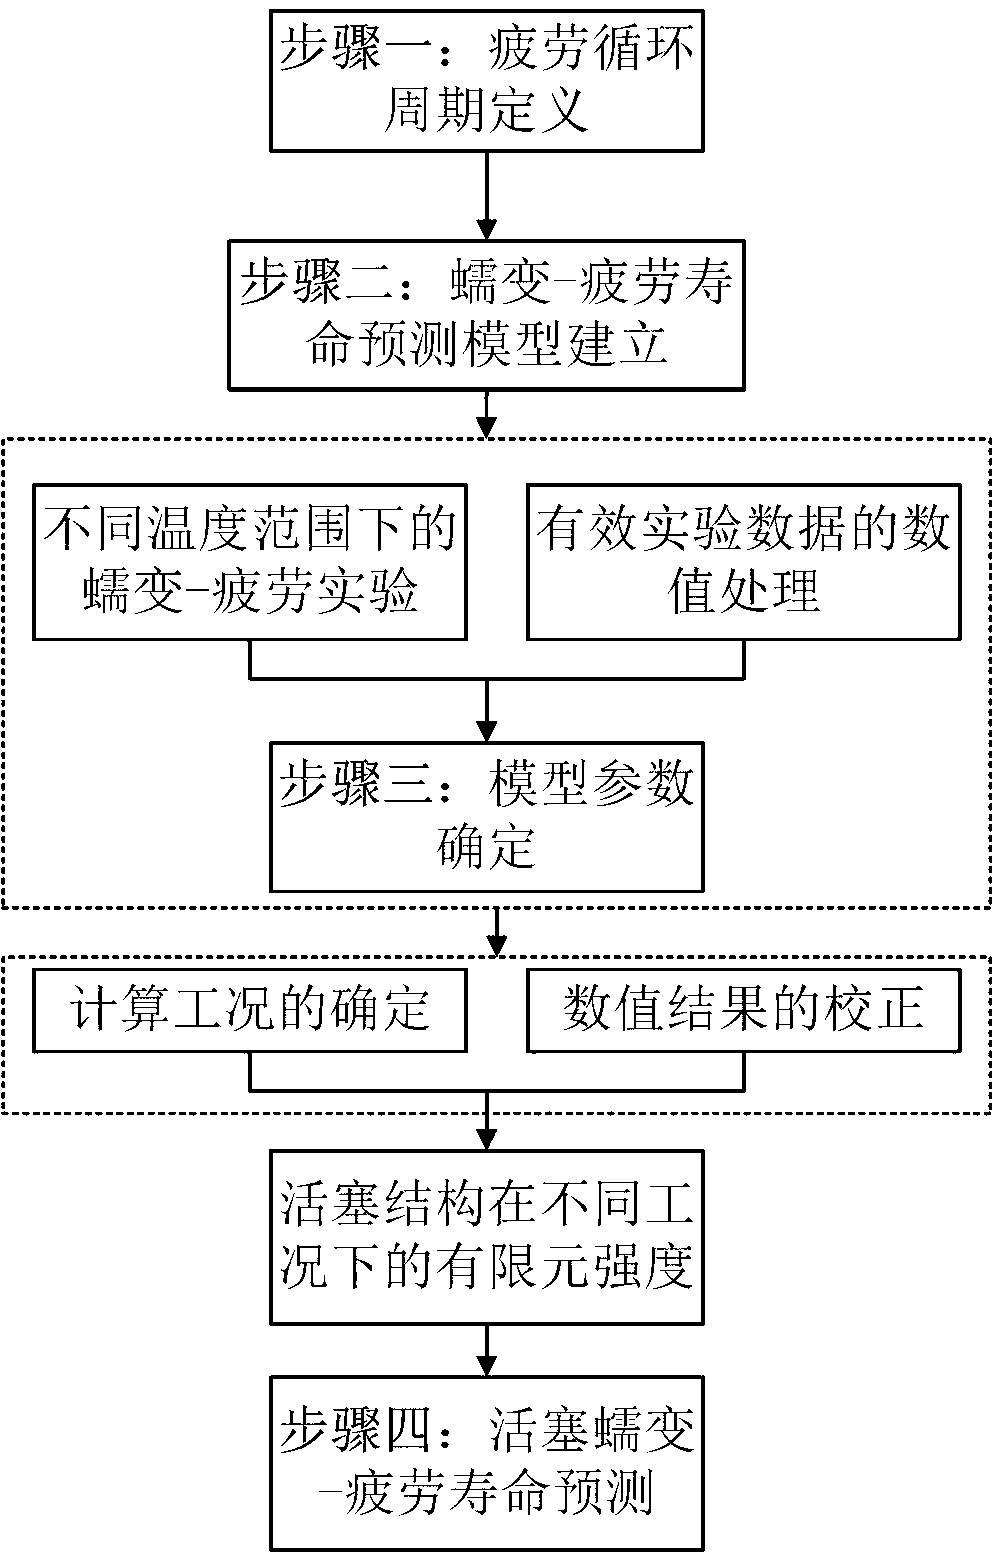 Method for predicting creep-fatigue service life of aluminum alloy piston of high-power diesel engine